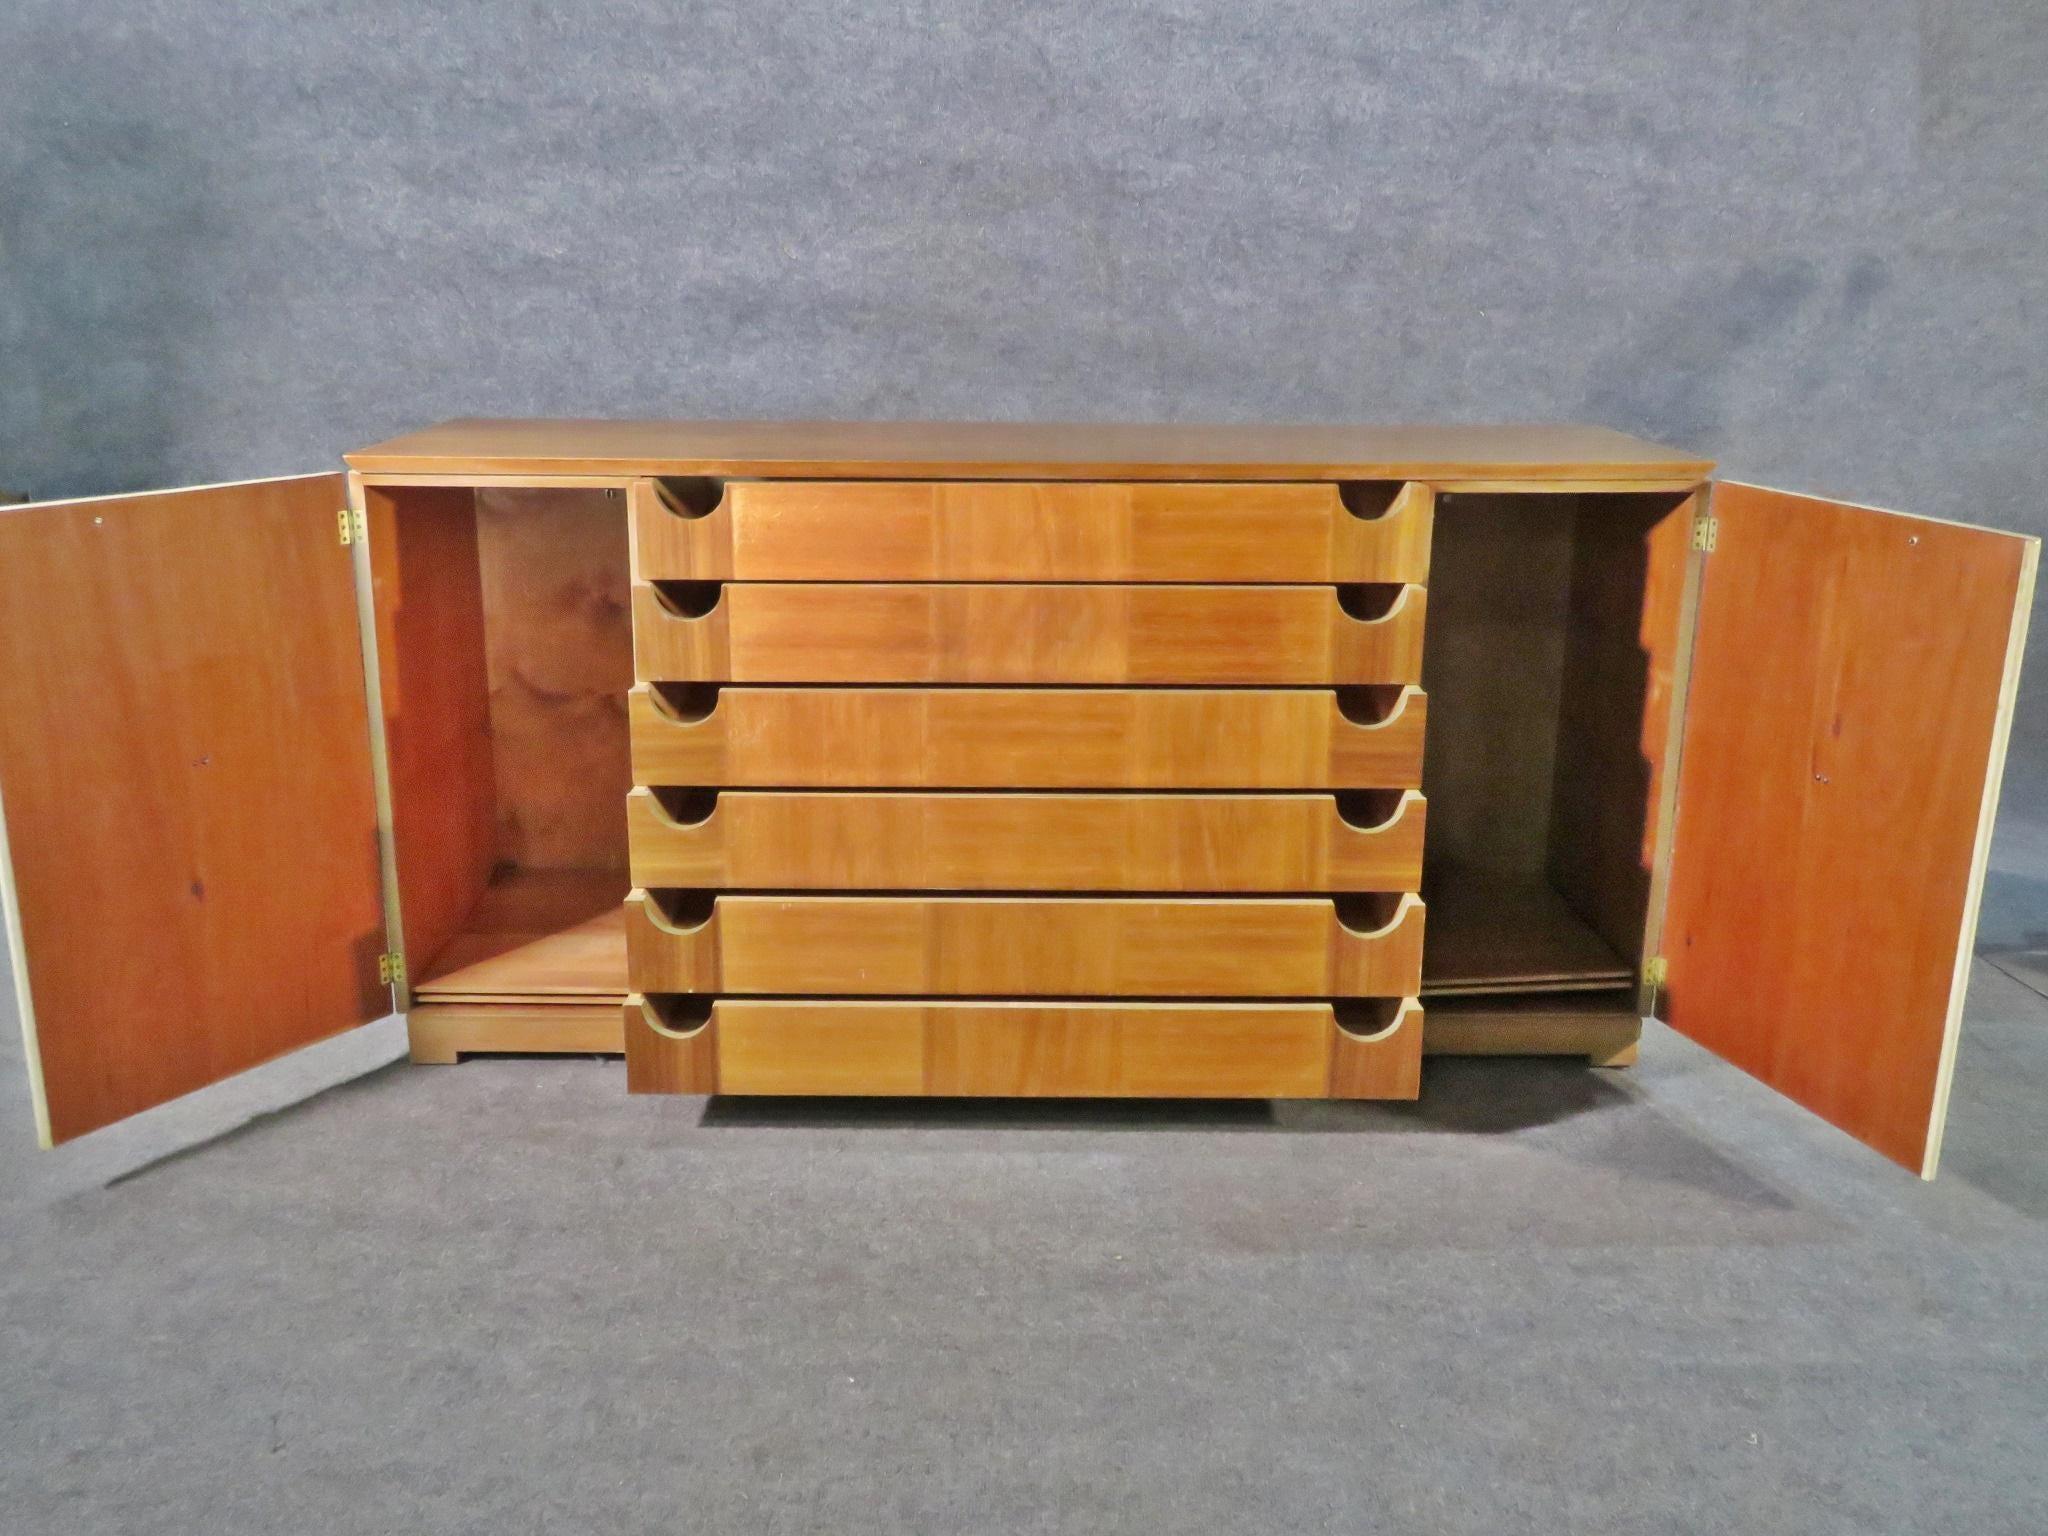 An elegant sideboard styled after Paul Laszlo, this Mid-Century Modern piece offers generous storage through doors containing two shelves and six dovetailed drawers. Please confirm item location with seller (NY/NJ).